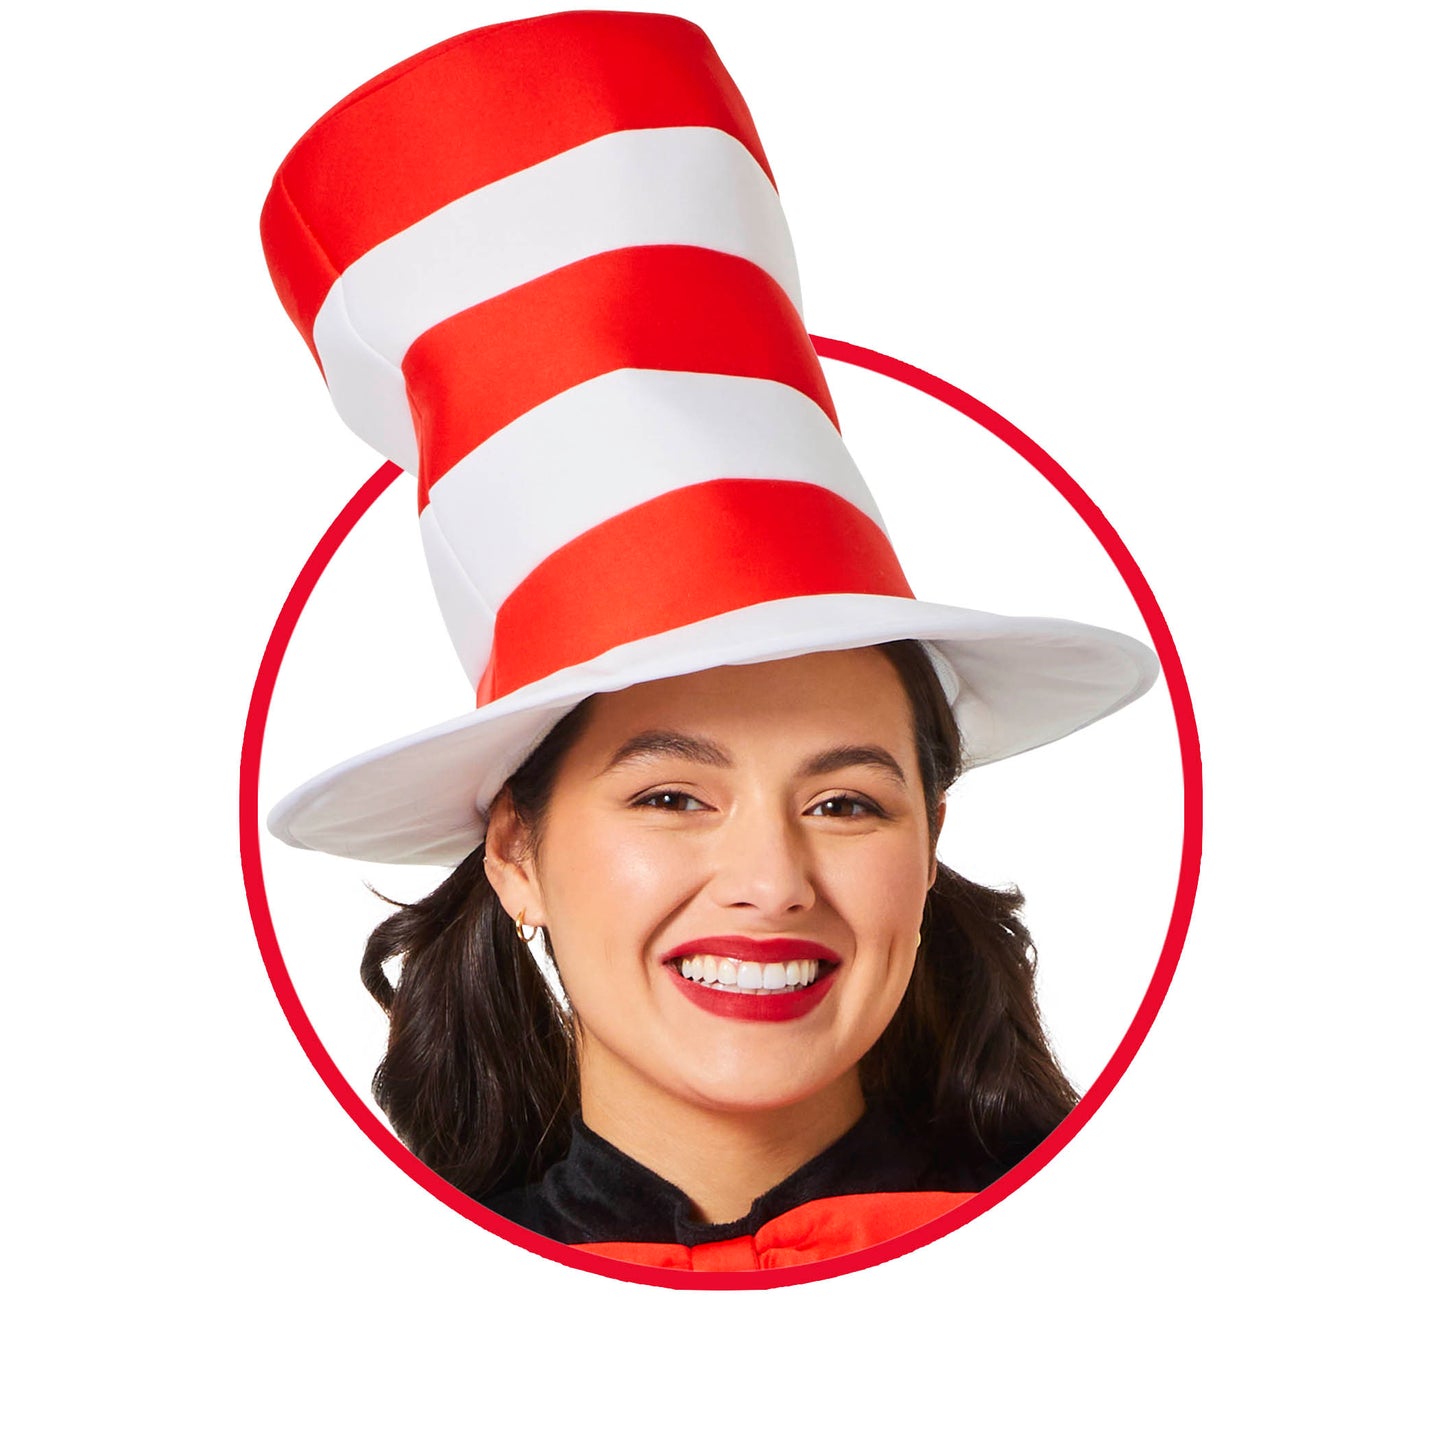 InSpirit Designs Adult Dr. Seuss The Cat In The Hat